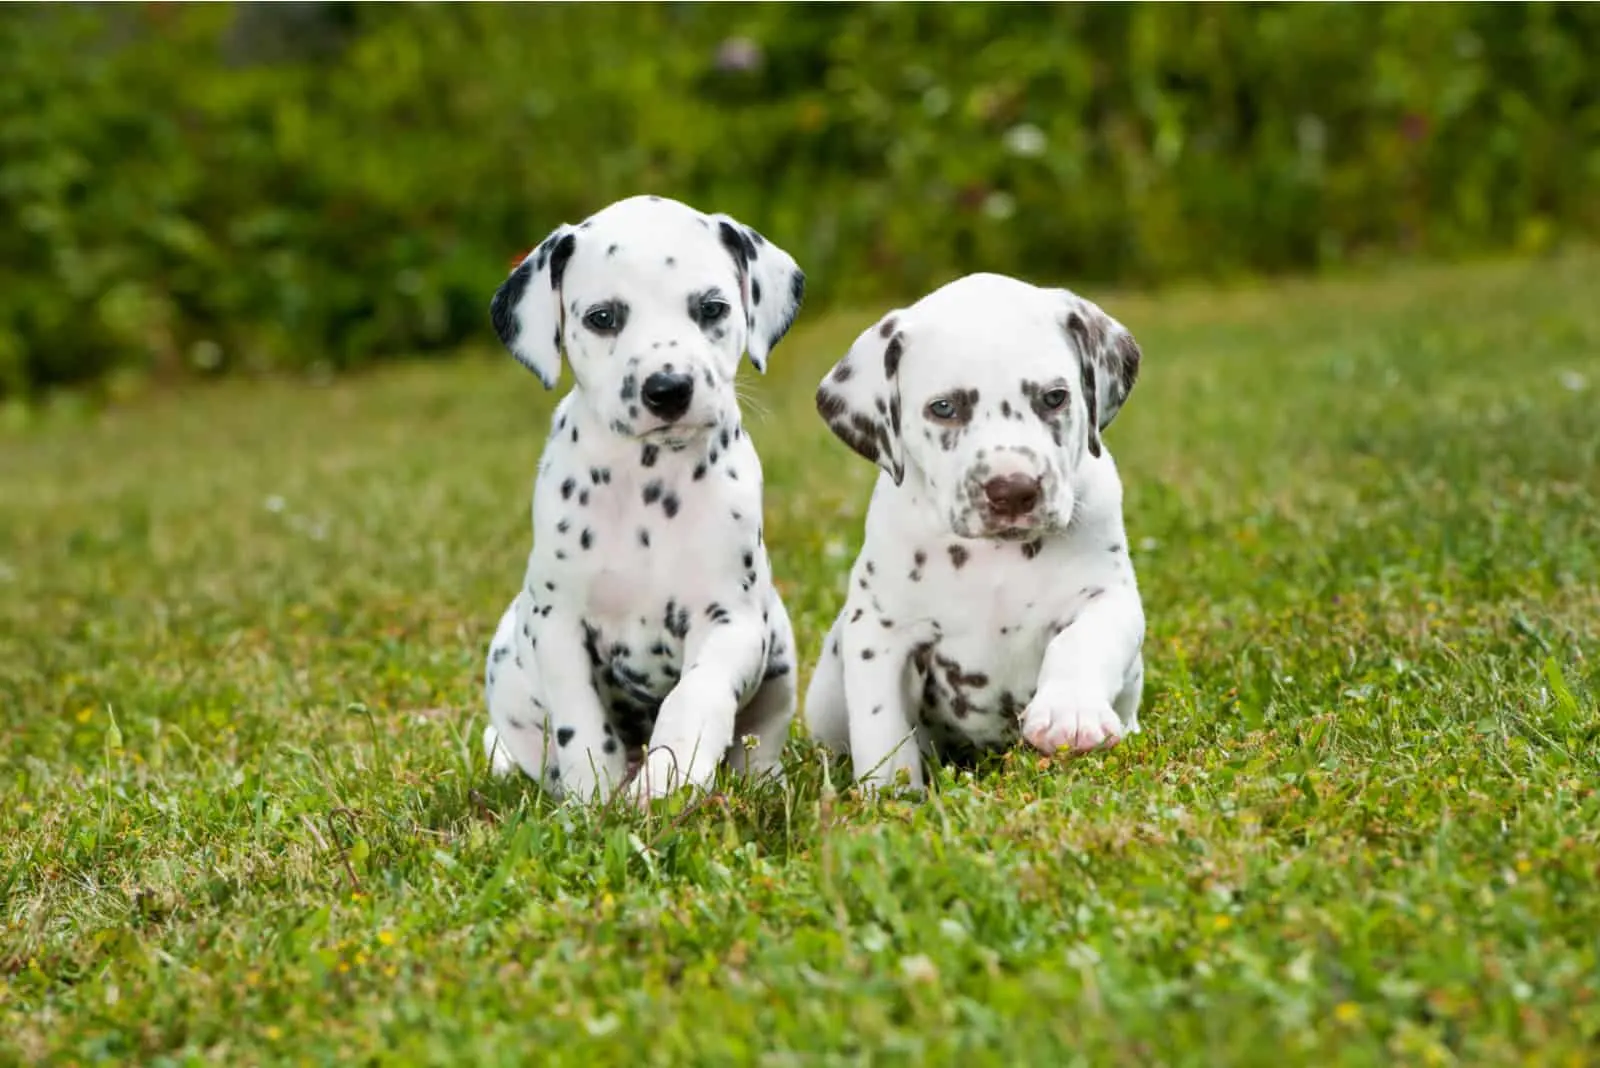 Dalmatian puppies playing on a meadow